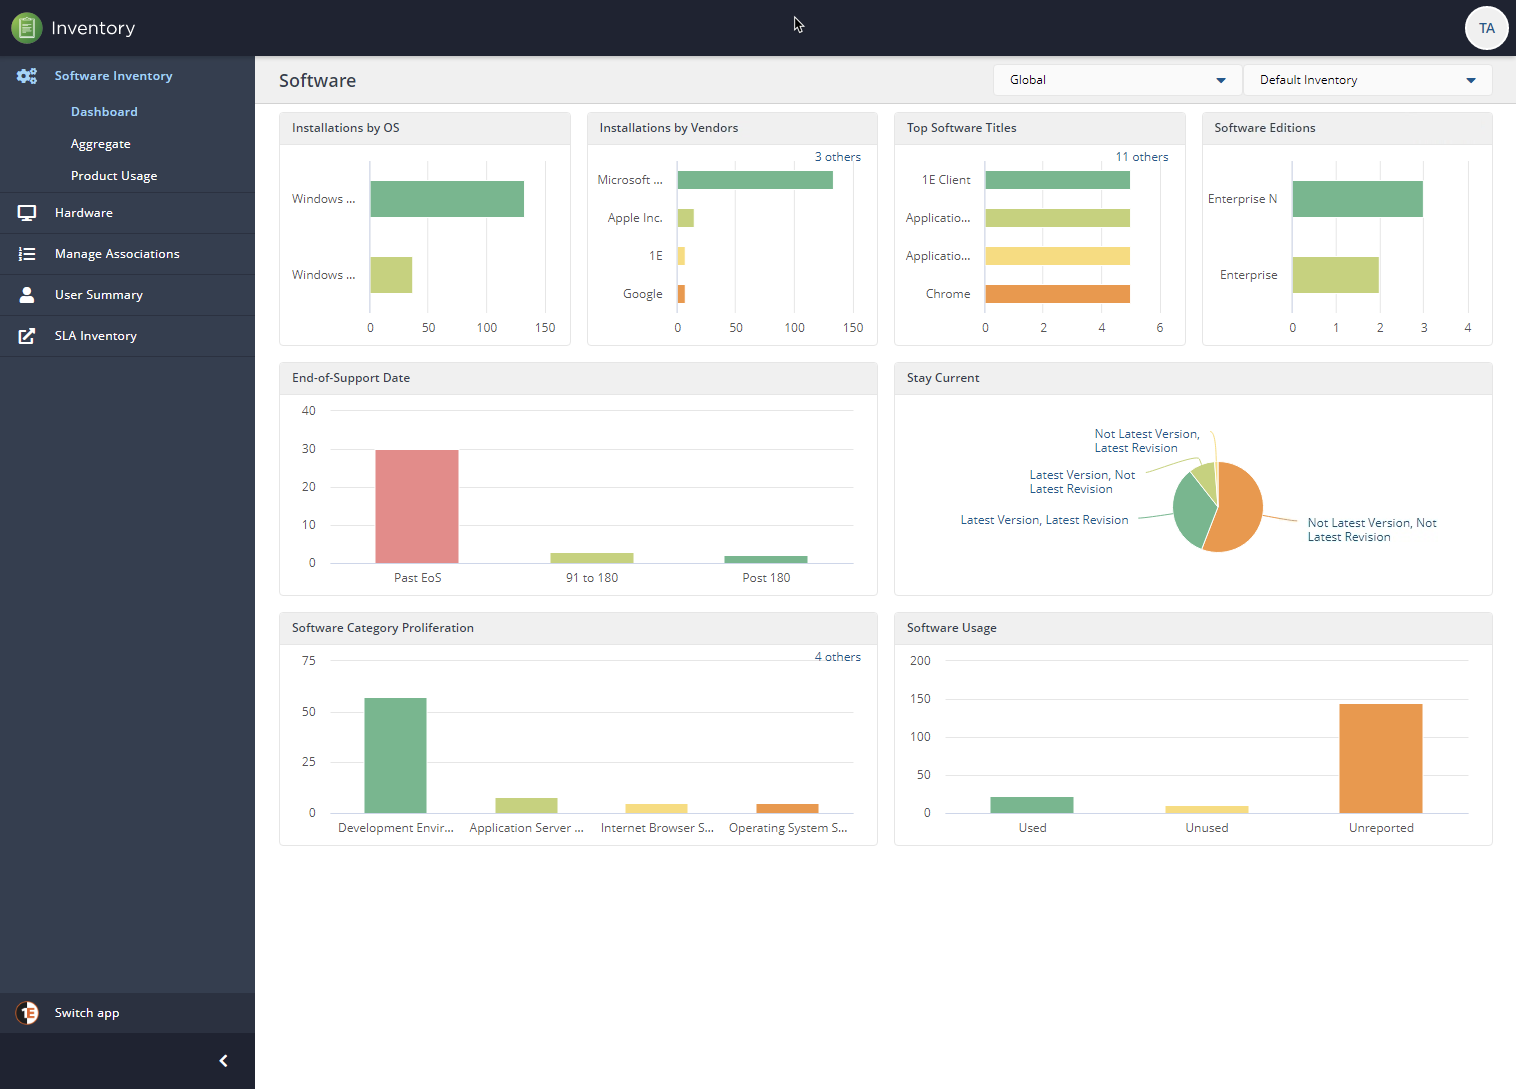 The Tachyon Inventory Software Inventory dashboard